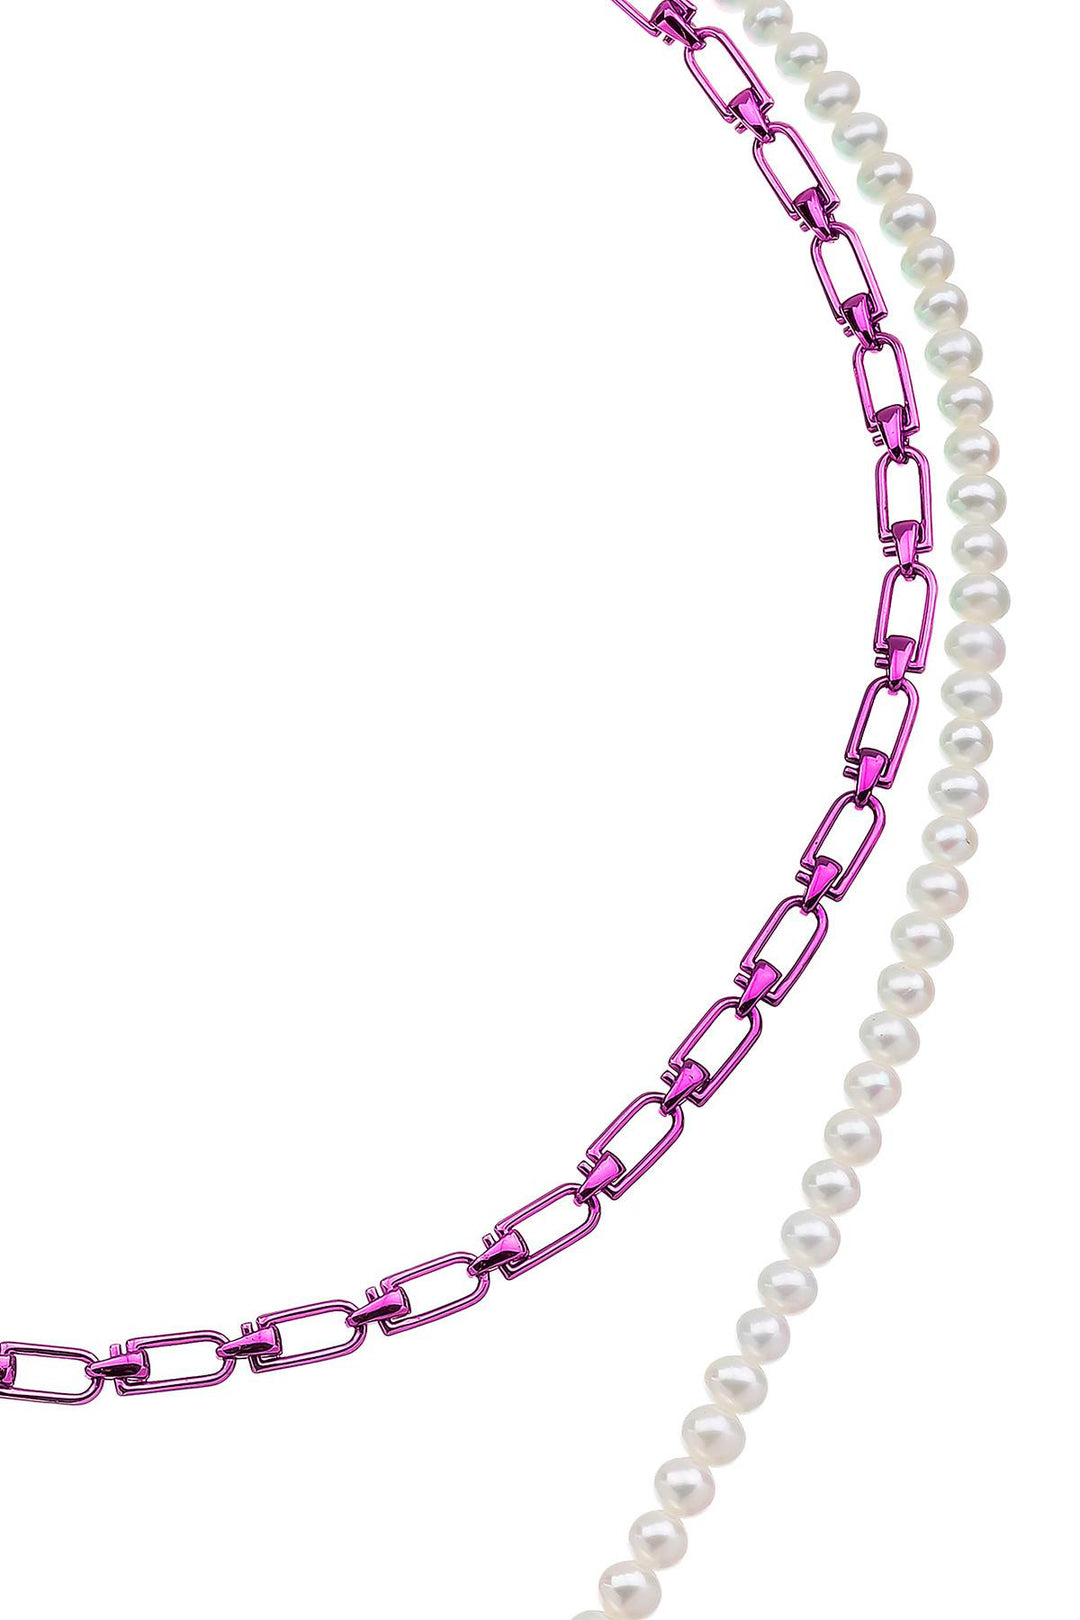 Eera 'Reine' Double Necklace With Pearls   Bianco